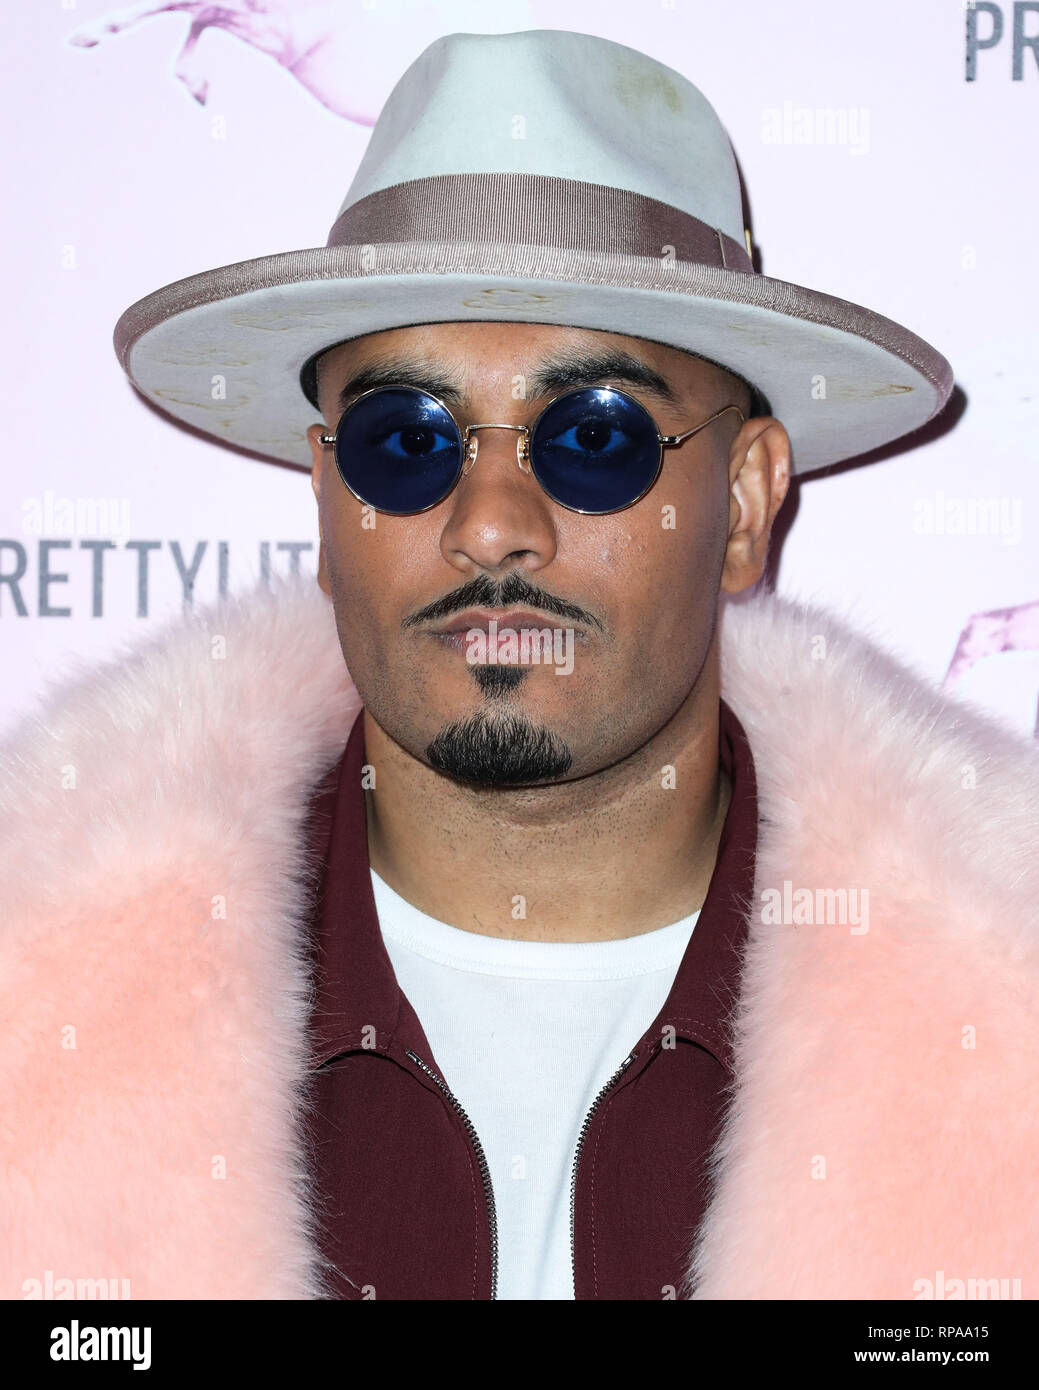 LOS ANGELES, CA, USA - FEBRUARY 20: Co-Founder and CEO of PrettyLittleThing  Umar Kamani arrives at the PrettyLittleThing Los Angeles Office Opening  Party held at the PrettyLittleThing Los Angeles Office on February